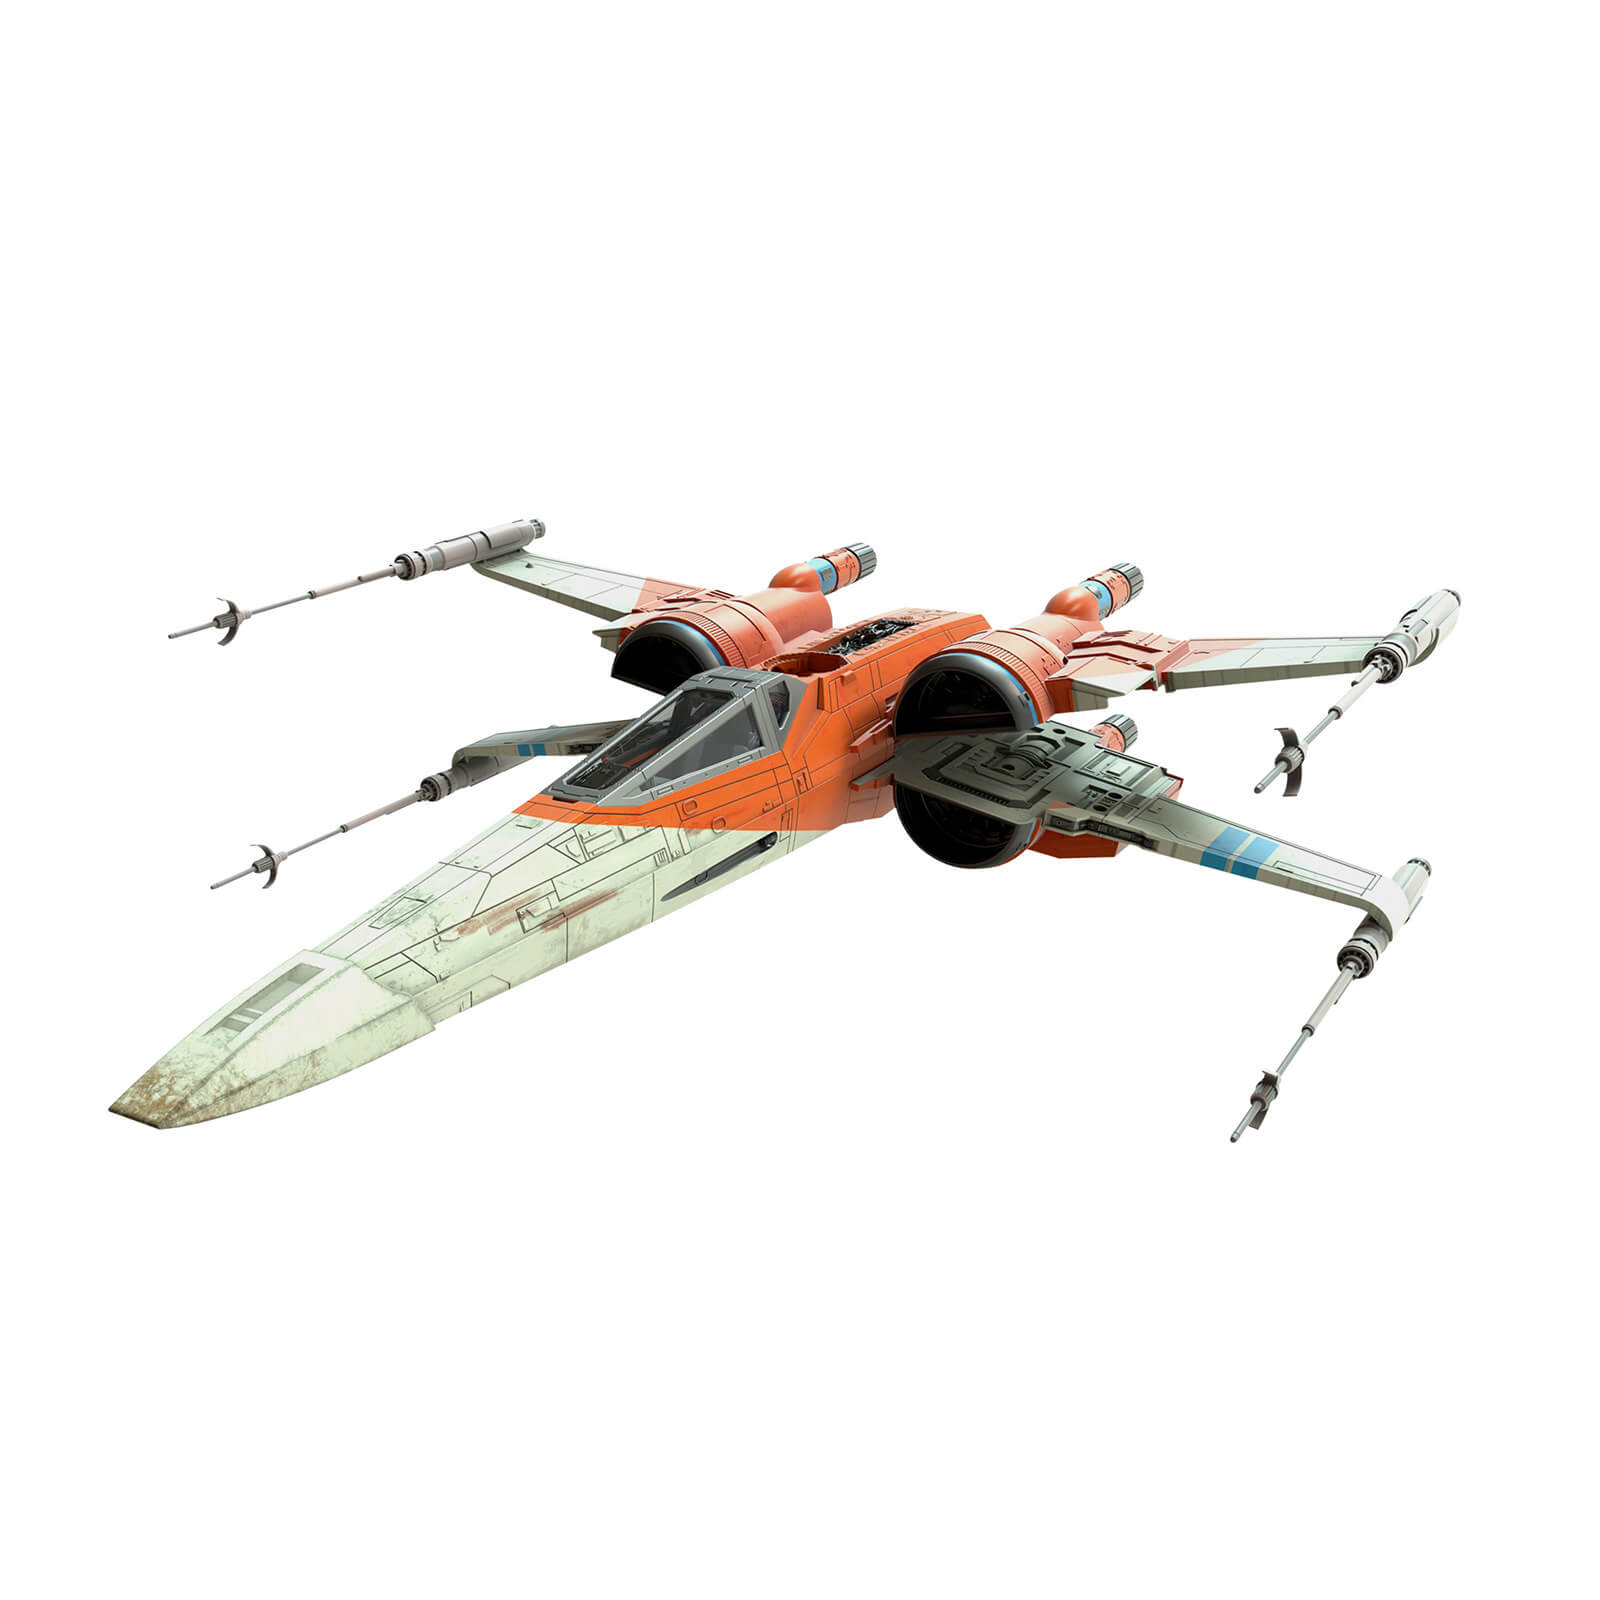 Hasbro Star Wars The Vintage Collection Star Wars: The Rise of Skywalker Poe Dameron’s X-Wing Fighter Toy Vehicle